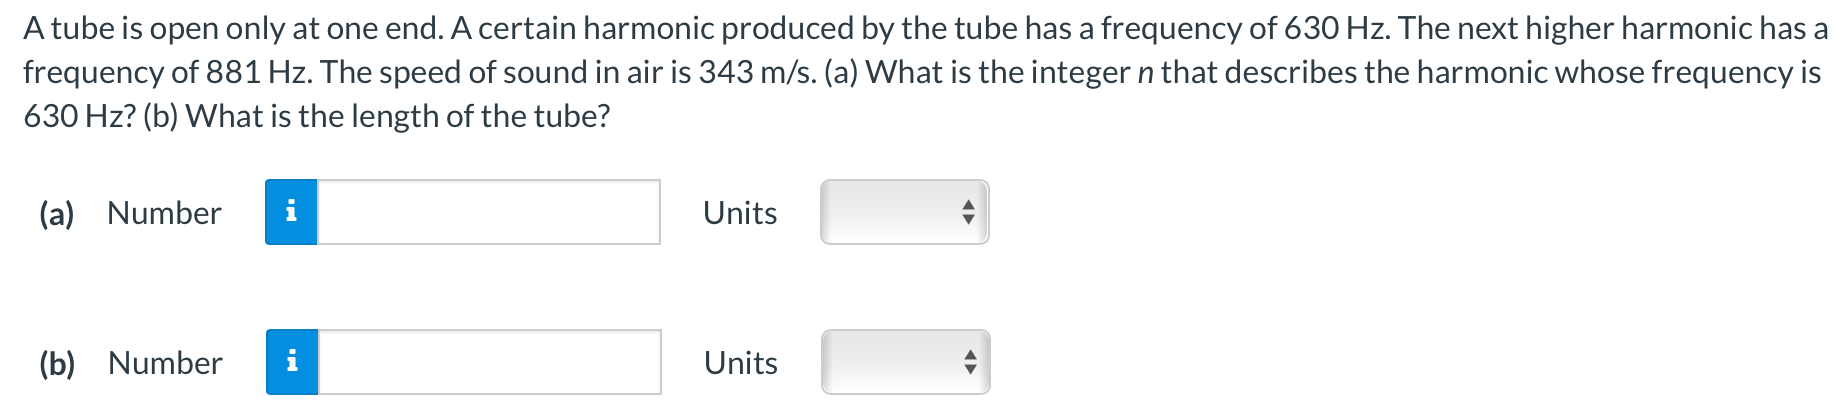 A tube is open only at one end. A certain harmonic produced by the tube has a frequency of 630 Hz. The next higher harmonic has a frequency of 881 Hz. The speed of sound in air is 343 m/s. (a) What is the integer n that describes the harmonic whose frequency is 630 Hz? (b) What is the length of the tube? (a) Number Units (b) Number Units